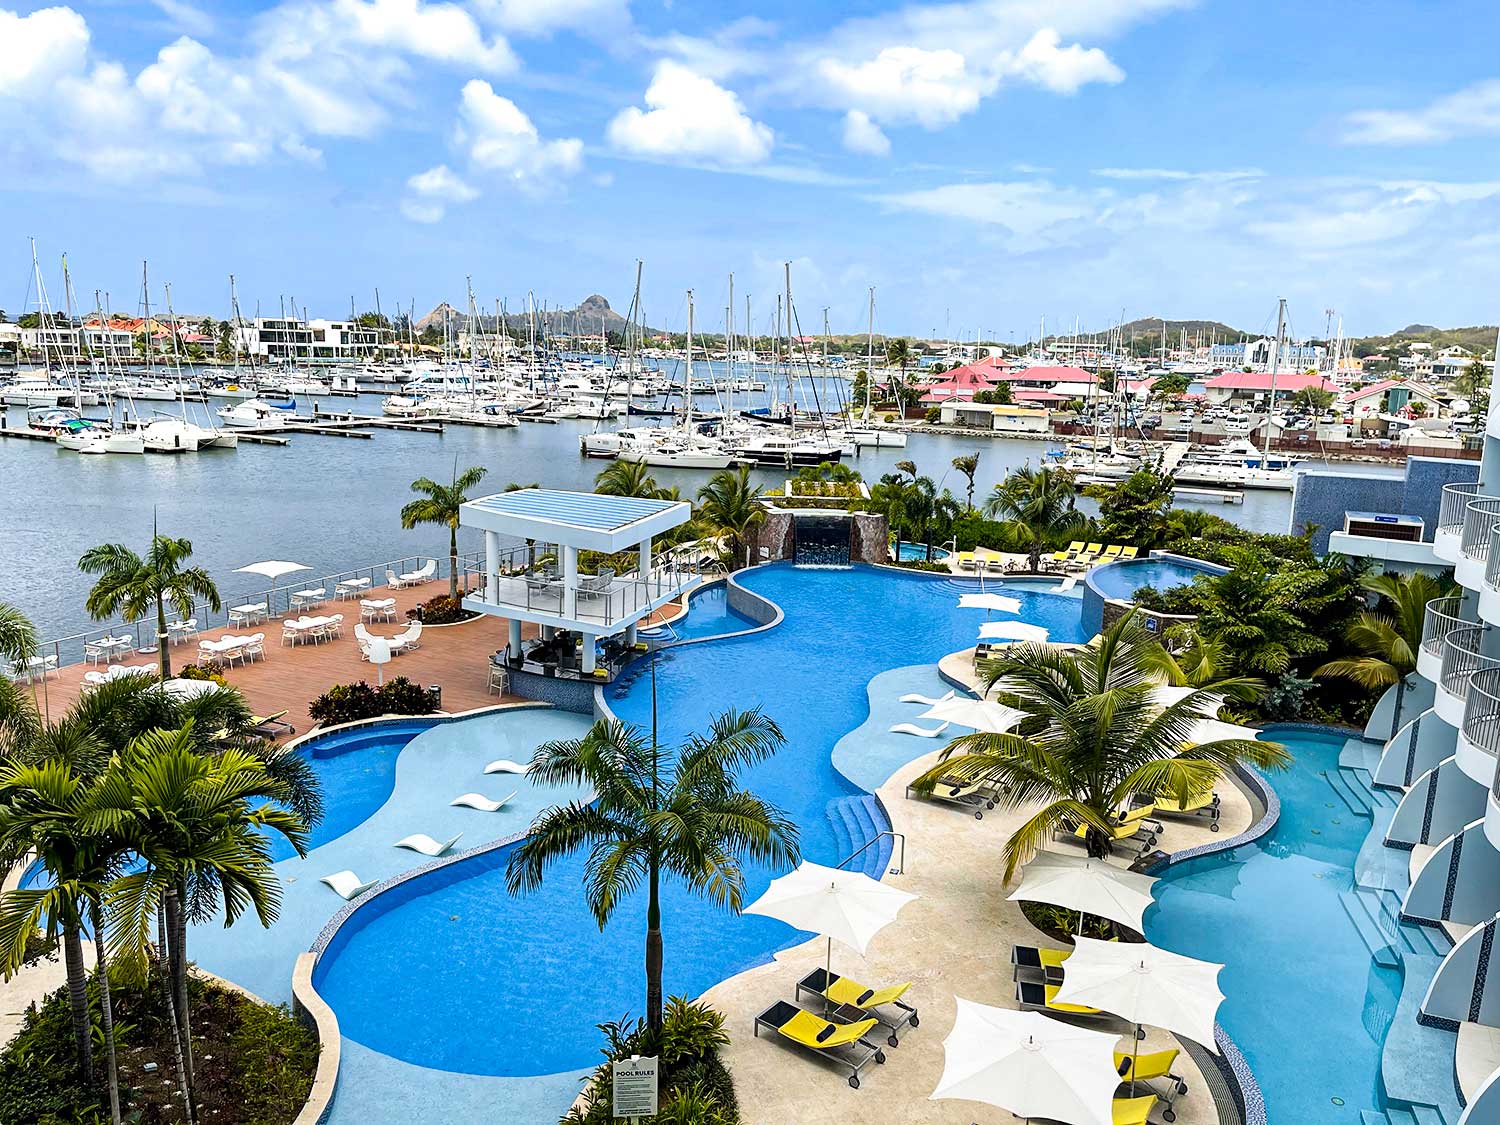 An aerial view of the pool and marina at Harbor Club in the Caribbean island of St. Lucia.